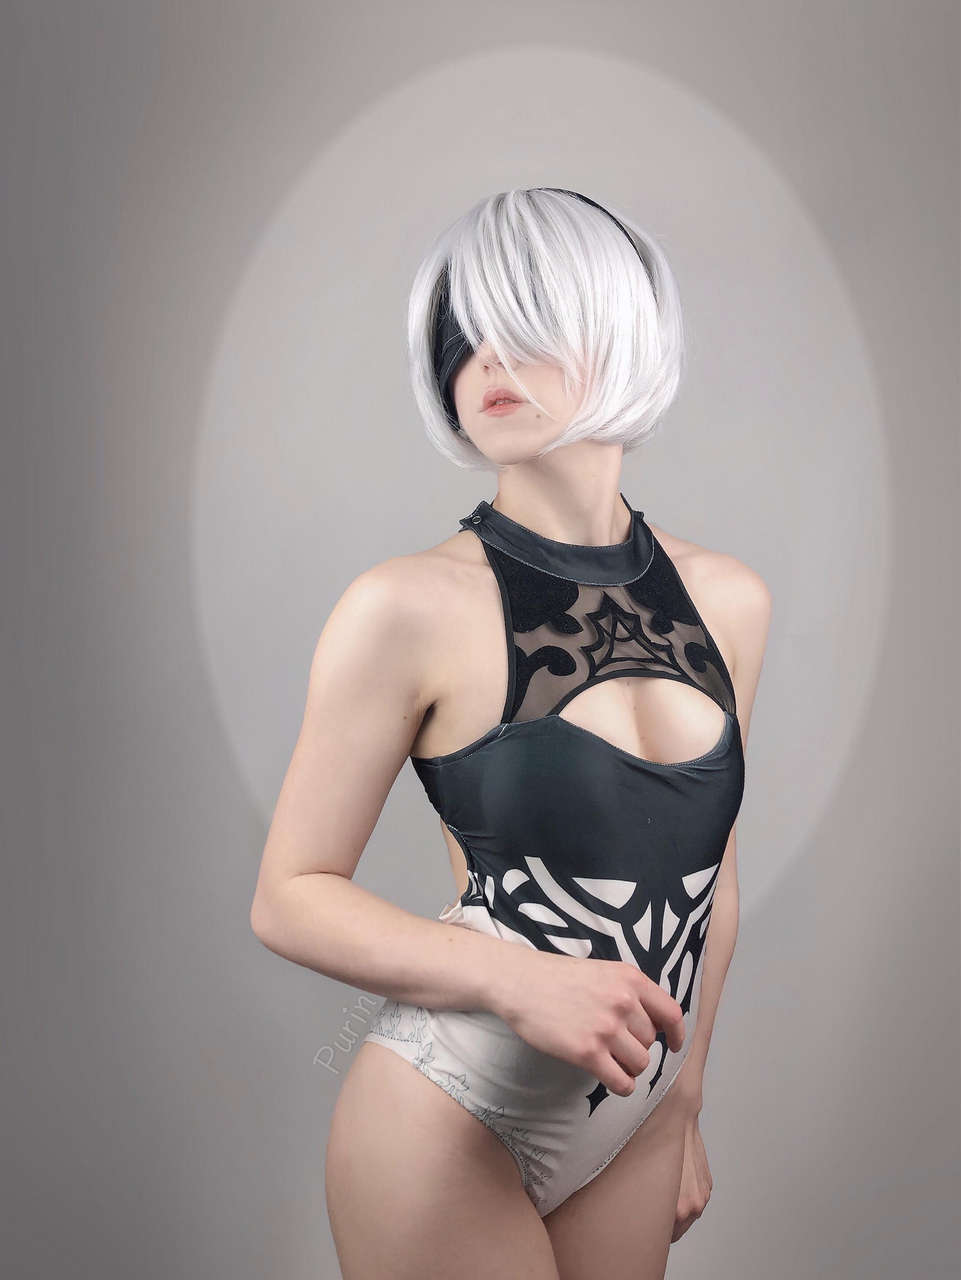 Swimsuit 2b From Nier Automata Cosplay By Puri